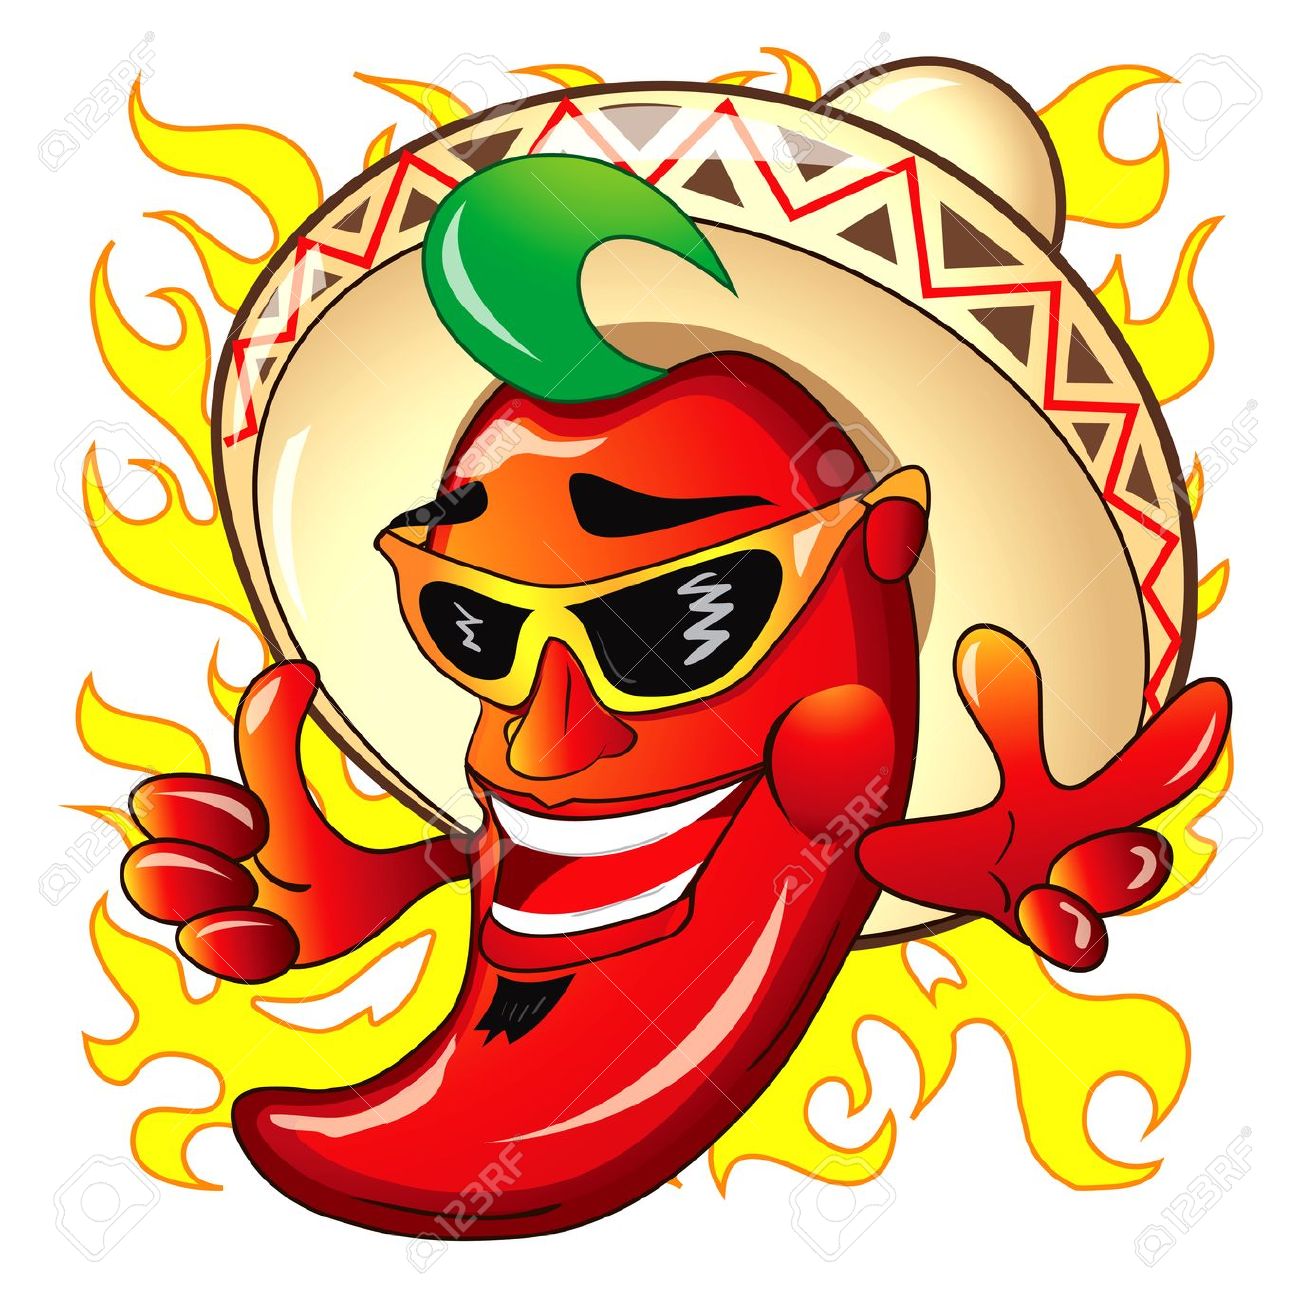 mexican food clipart jalepino - Clipground